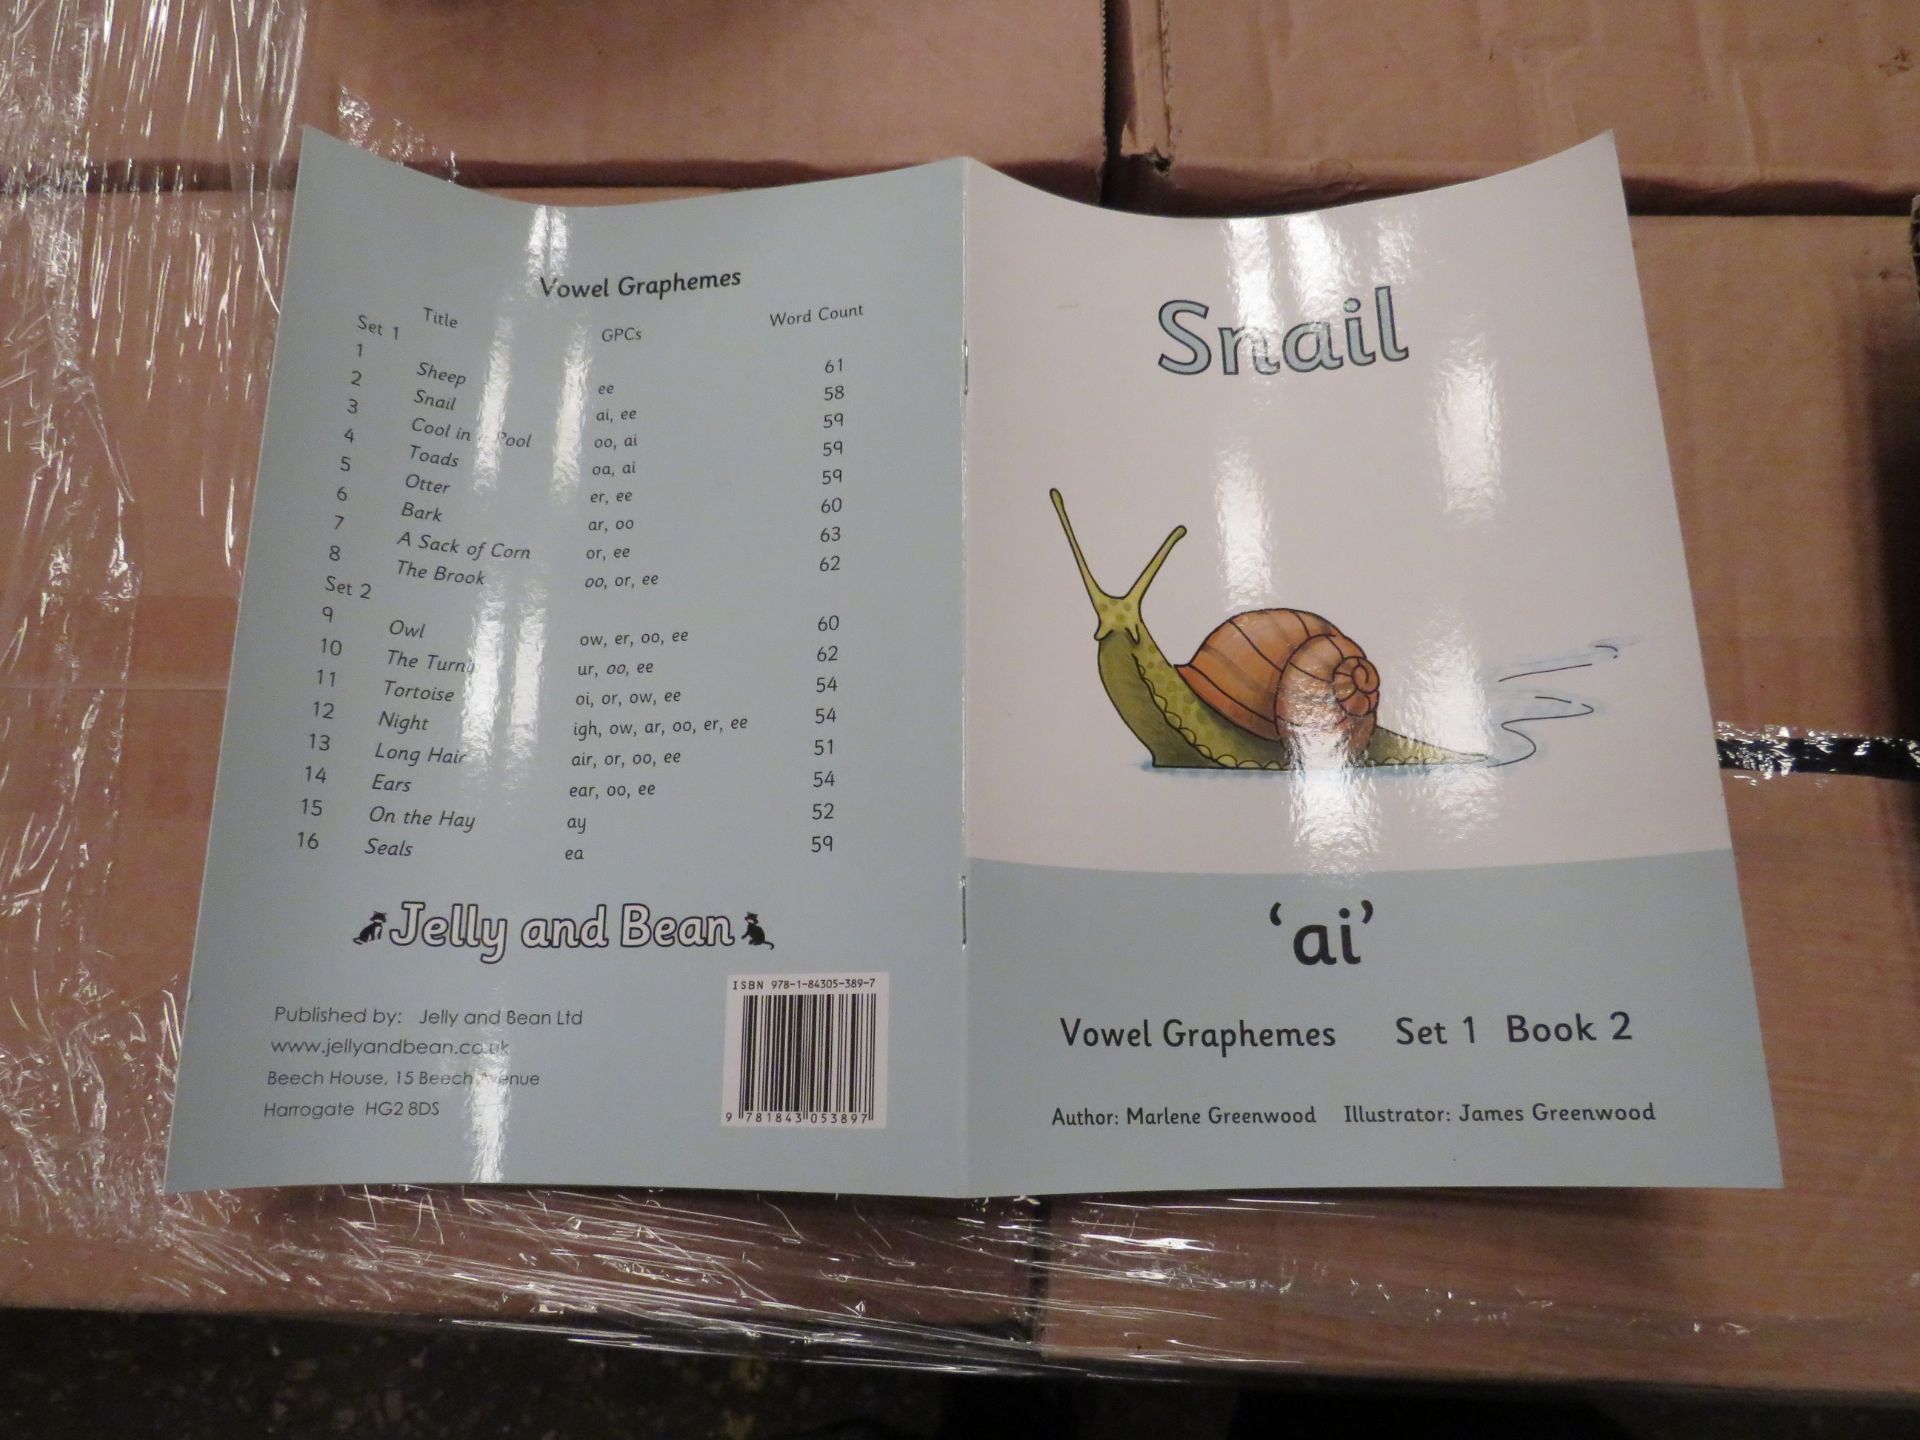 1X Pallet Containing 48x Boxes being : Children's Educational Books, Vowel / Vowel Graphemes - Image 6 of 7